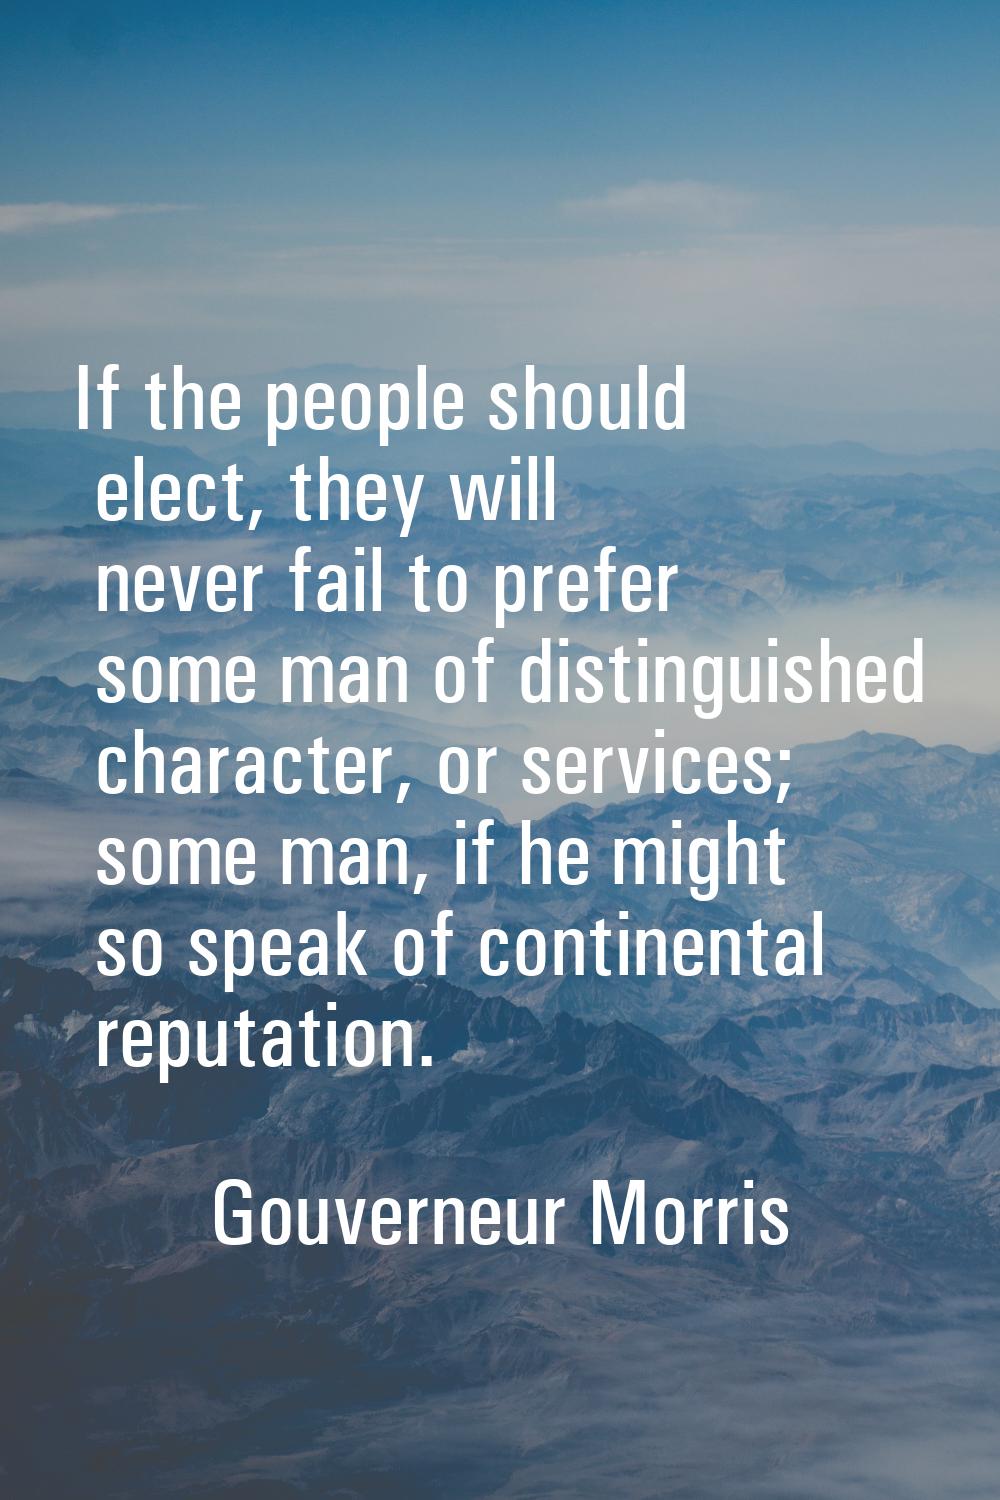 If the people should elect, they will never fail to prefer some man of distinguished character, or 